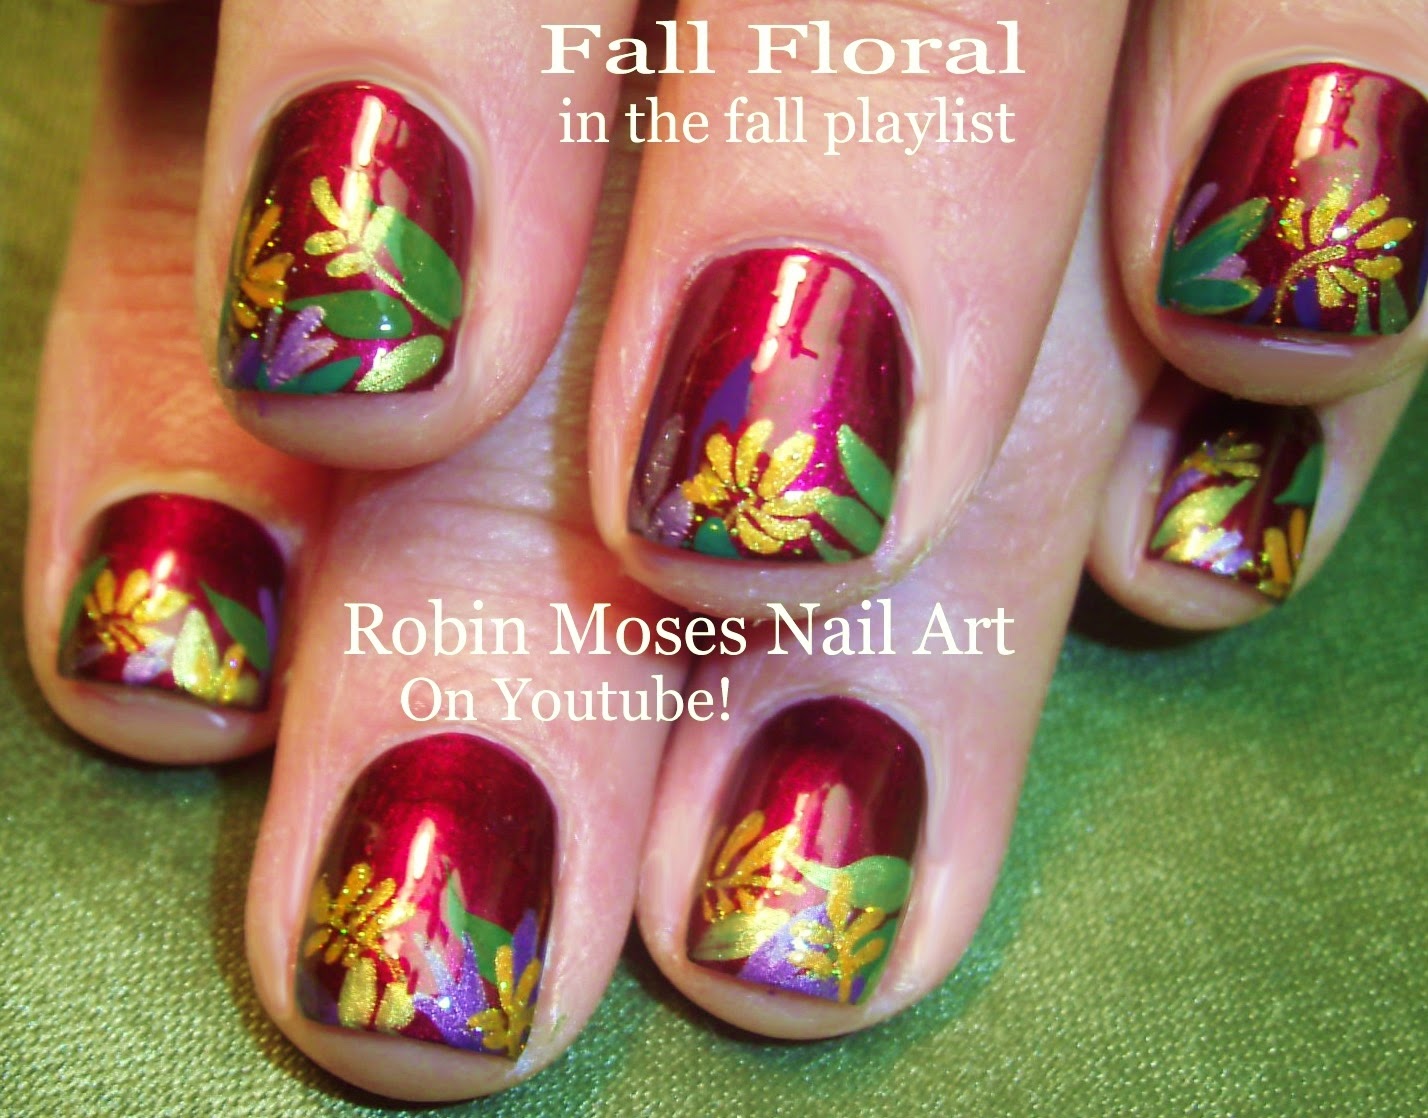 4. Thanksgiving Nail Designs - wide 10